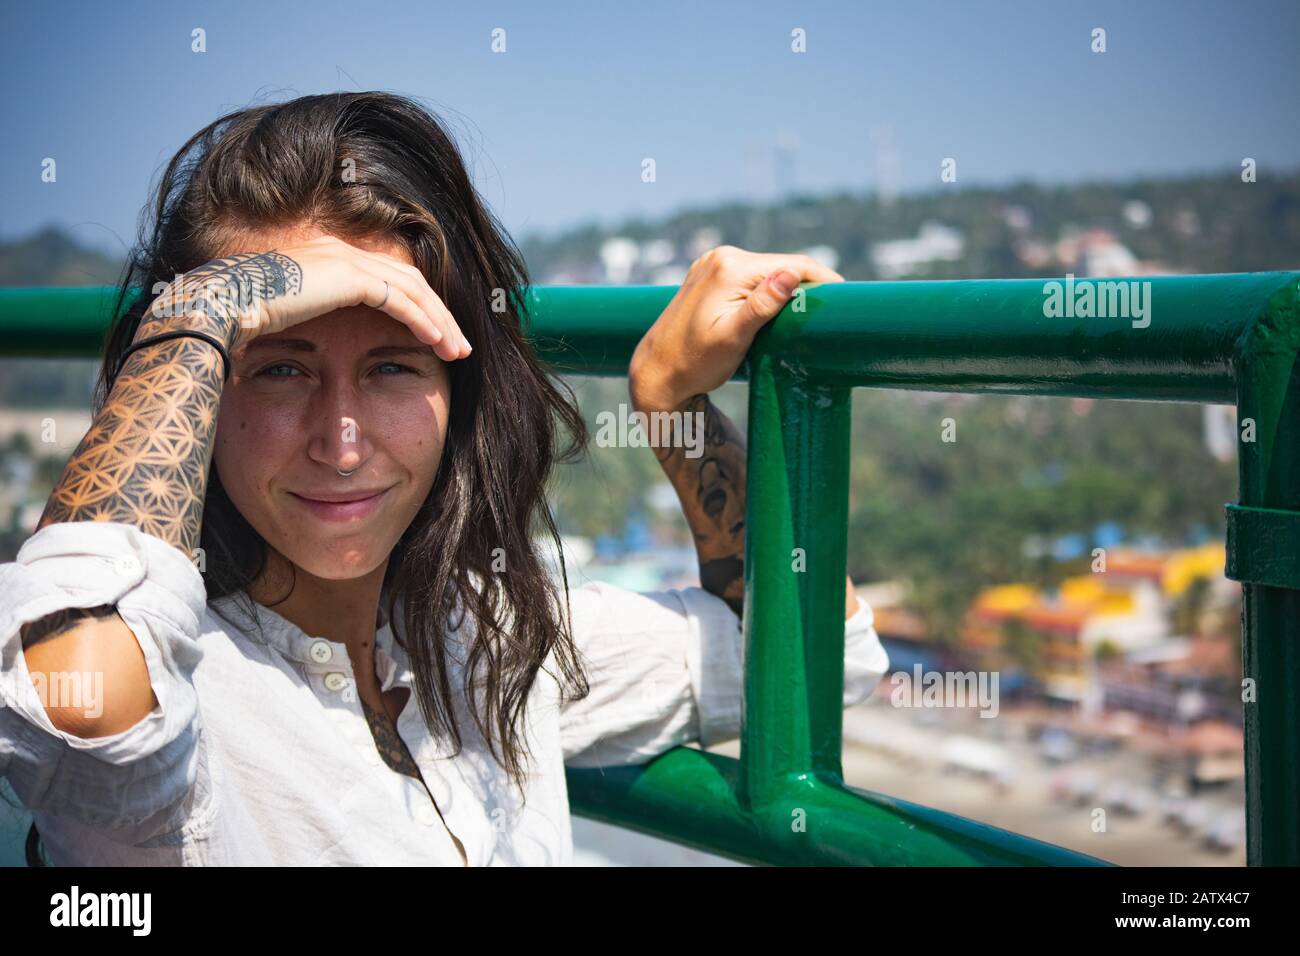 Beautiful girl with many tattoos on both arms shields her face from the strong sunlight whilst looking at the camera with a great view Stock Photo